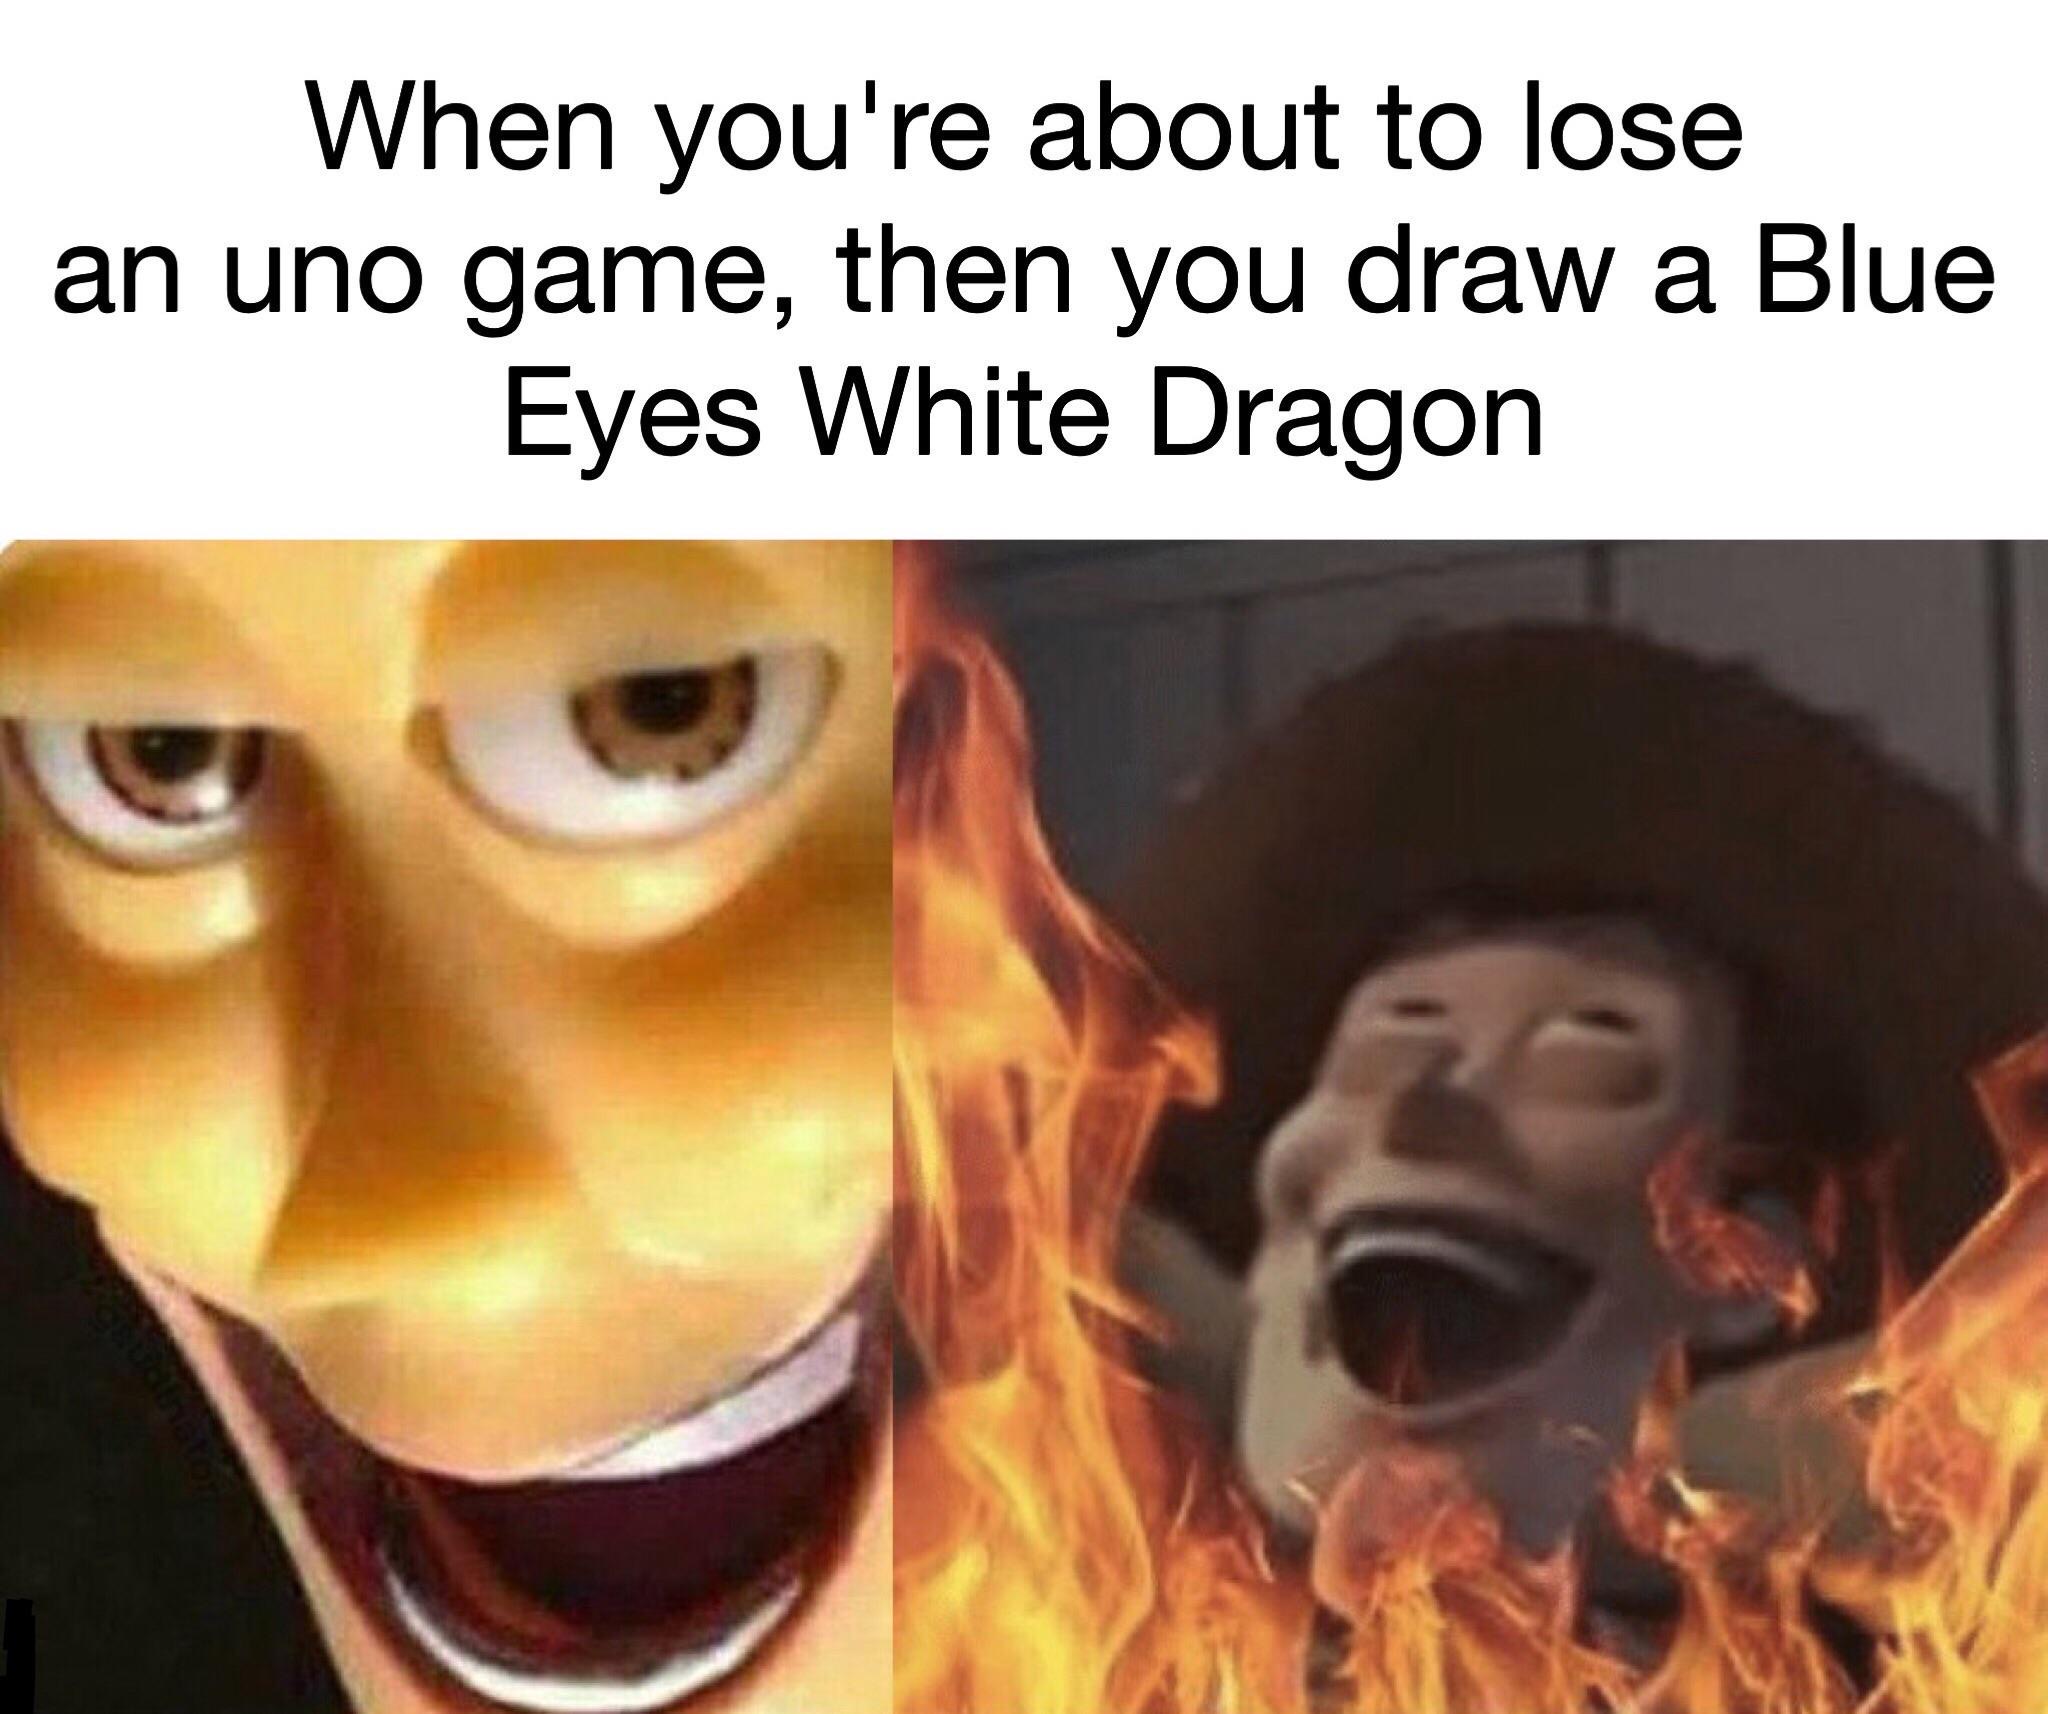 funny memes - yes i am pretty despicable meme - When you're about to lose an uno game, then you draw a Blue Eyes White Dragon